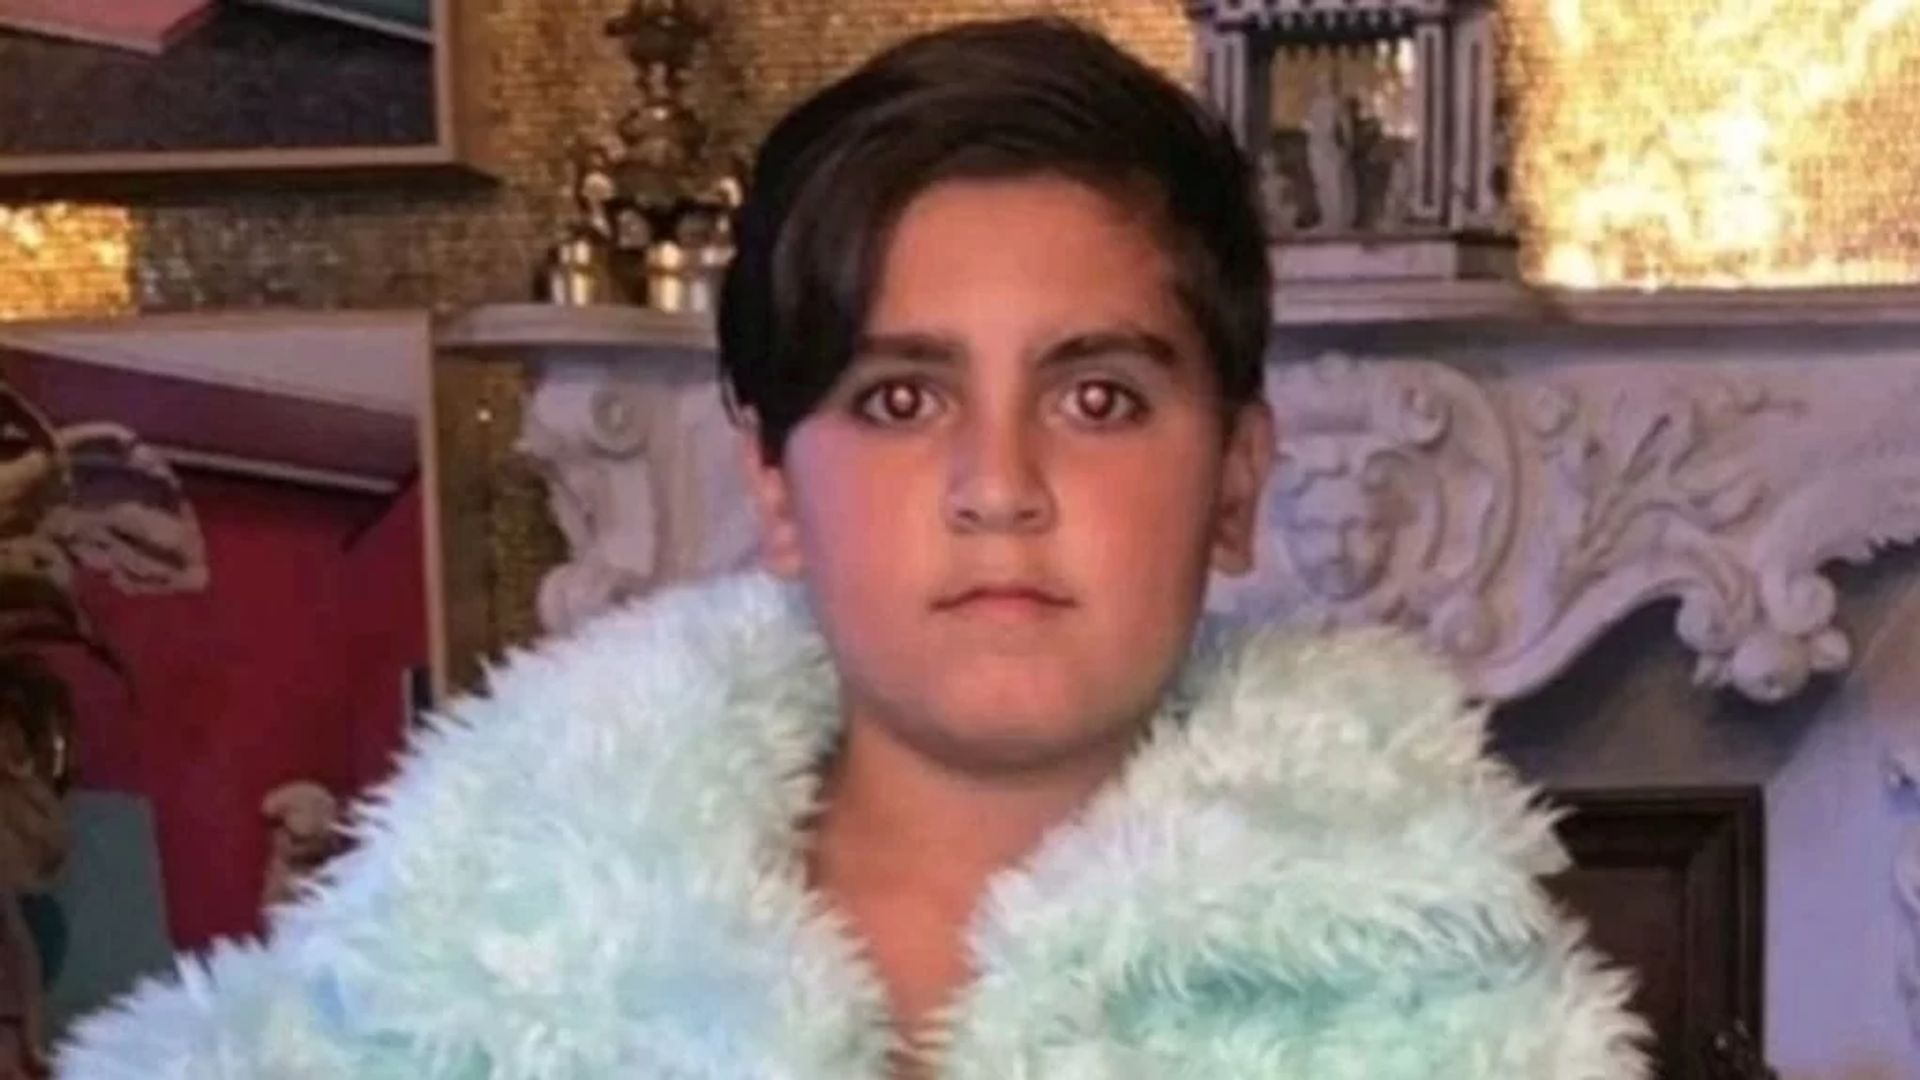 Mason Disick shares new glimpse inside personal life - and it's refreshingly normal